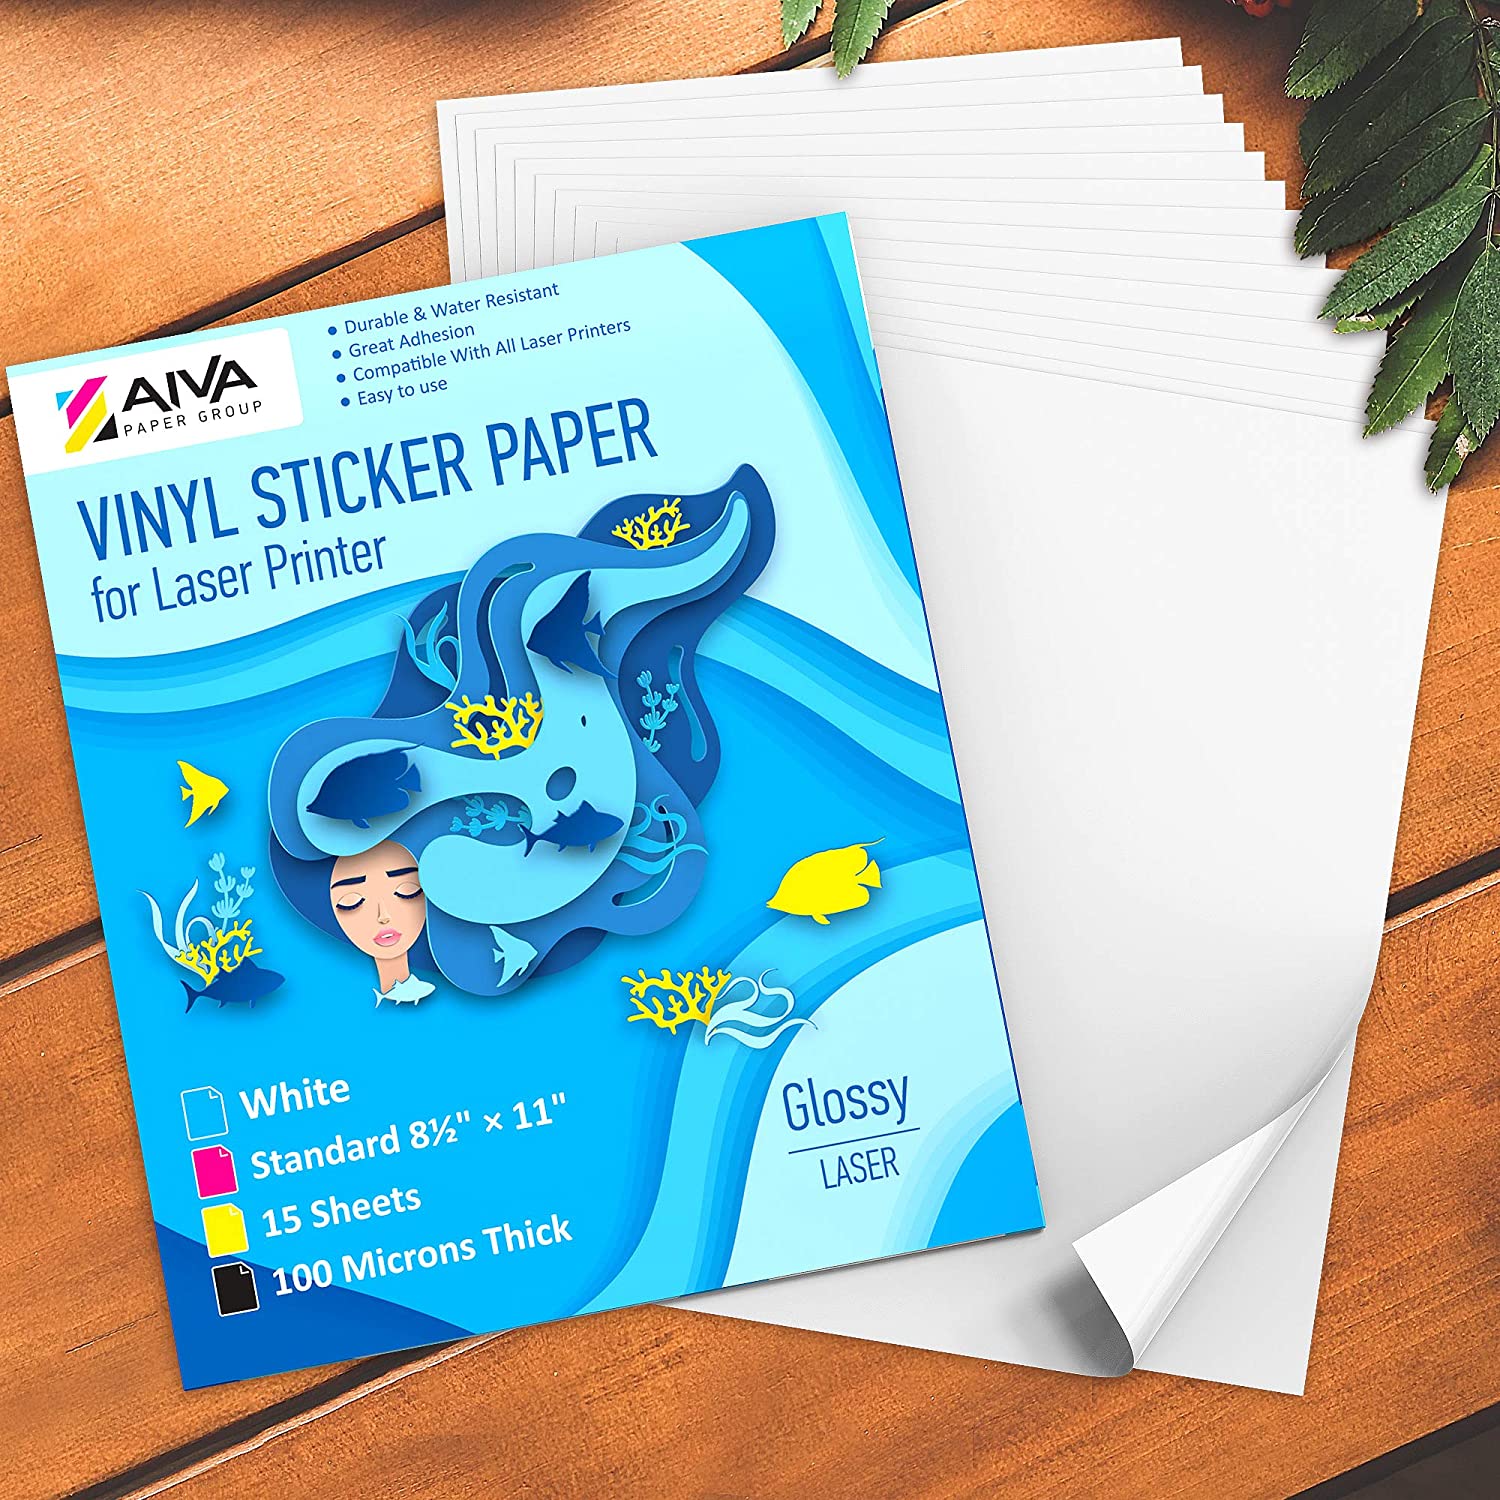 Printable Vinyl Sticker Paper Laser Glossy 15 sheets – AIVA Paper Group